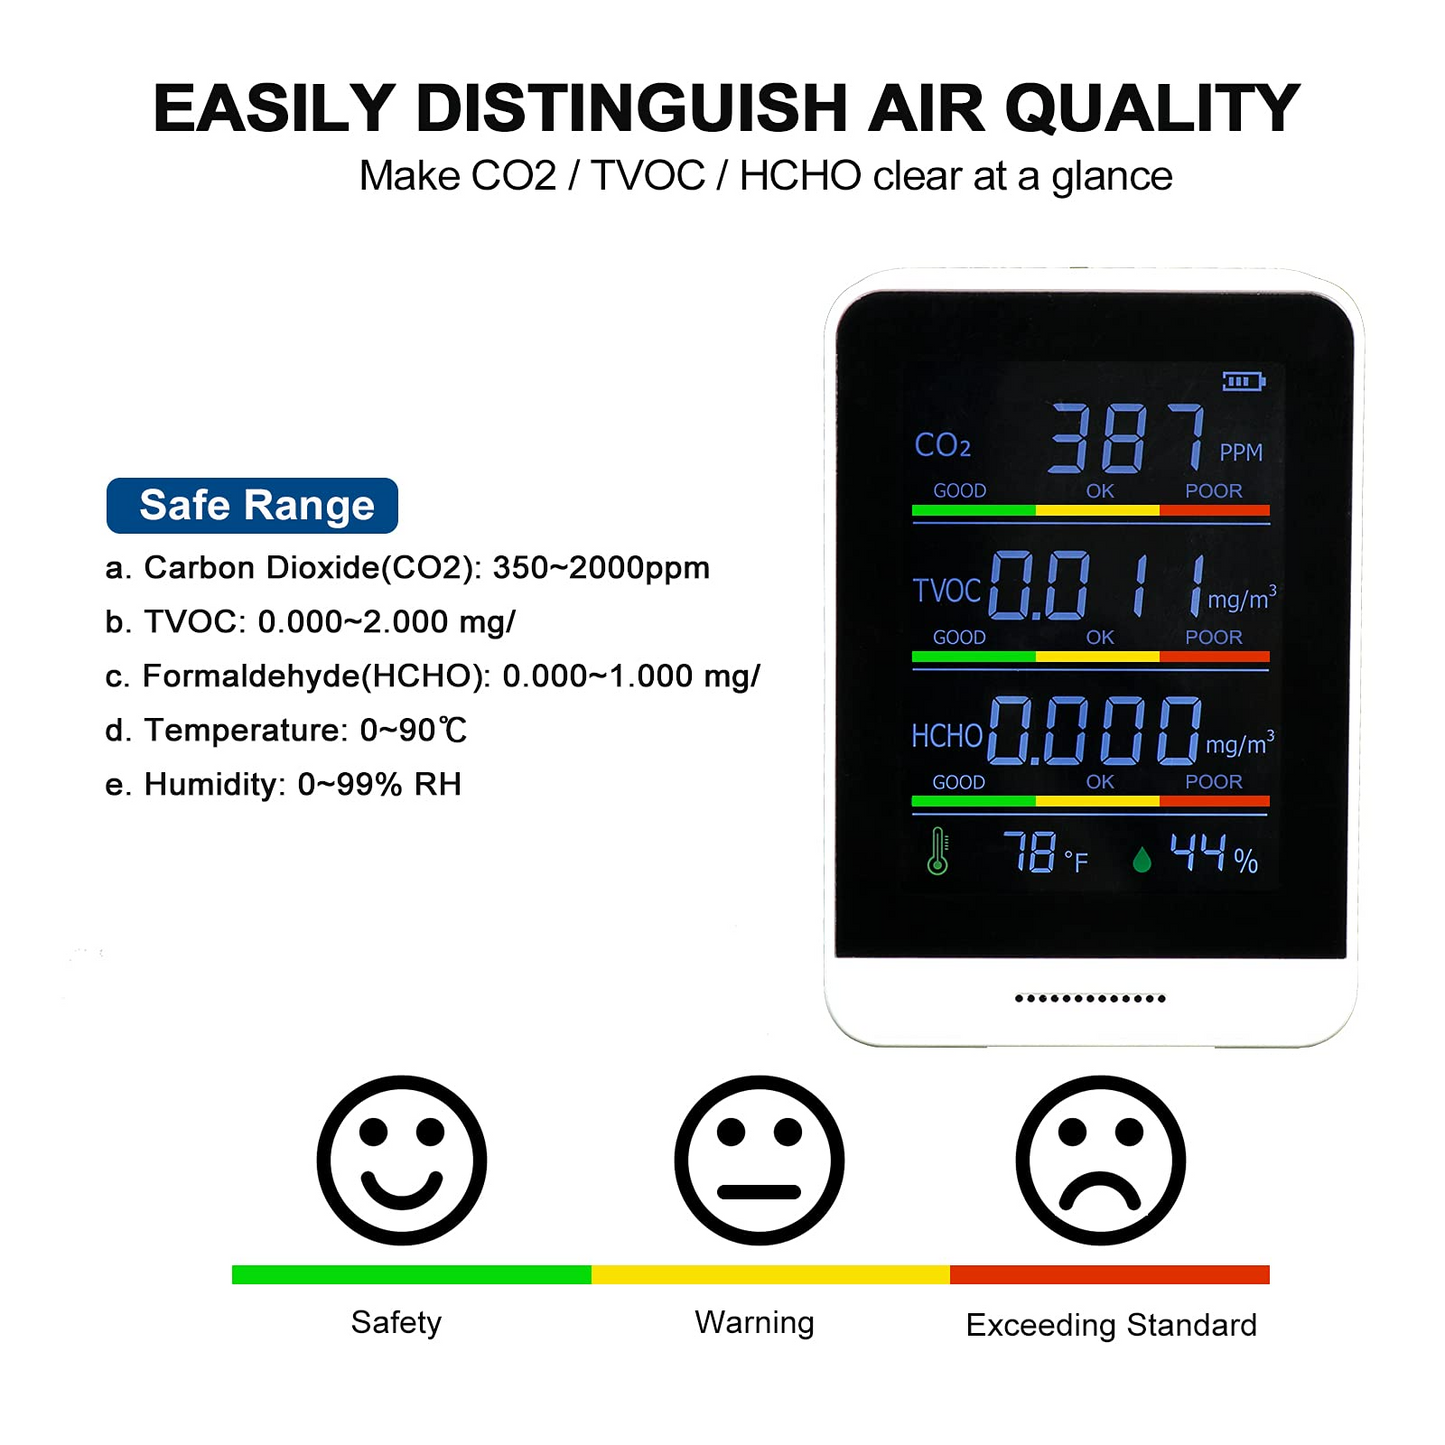 BNISE Co2 Detector Air Quality Monitor Indoor Carbon Dioxide Detector and Alarm Function Temperature & Relative Humidity Sensor Digital Pollution Tester for Wine Cellars Homes Office Car Grow Tents